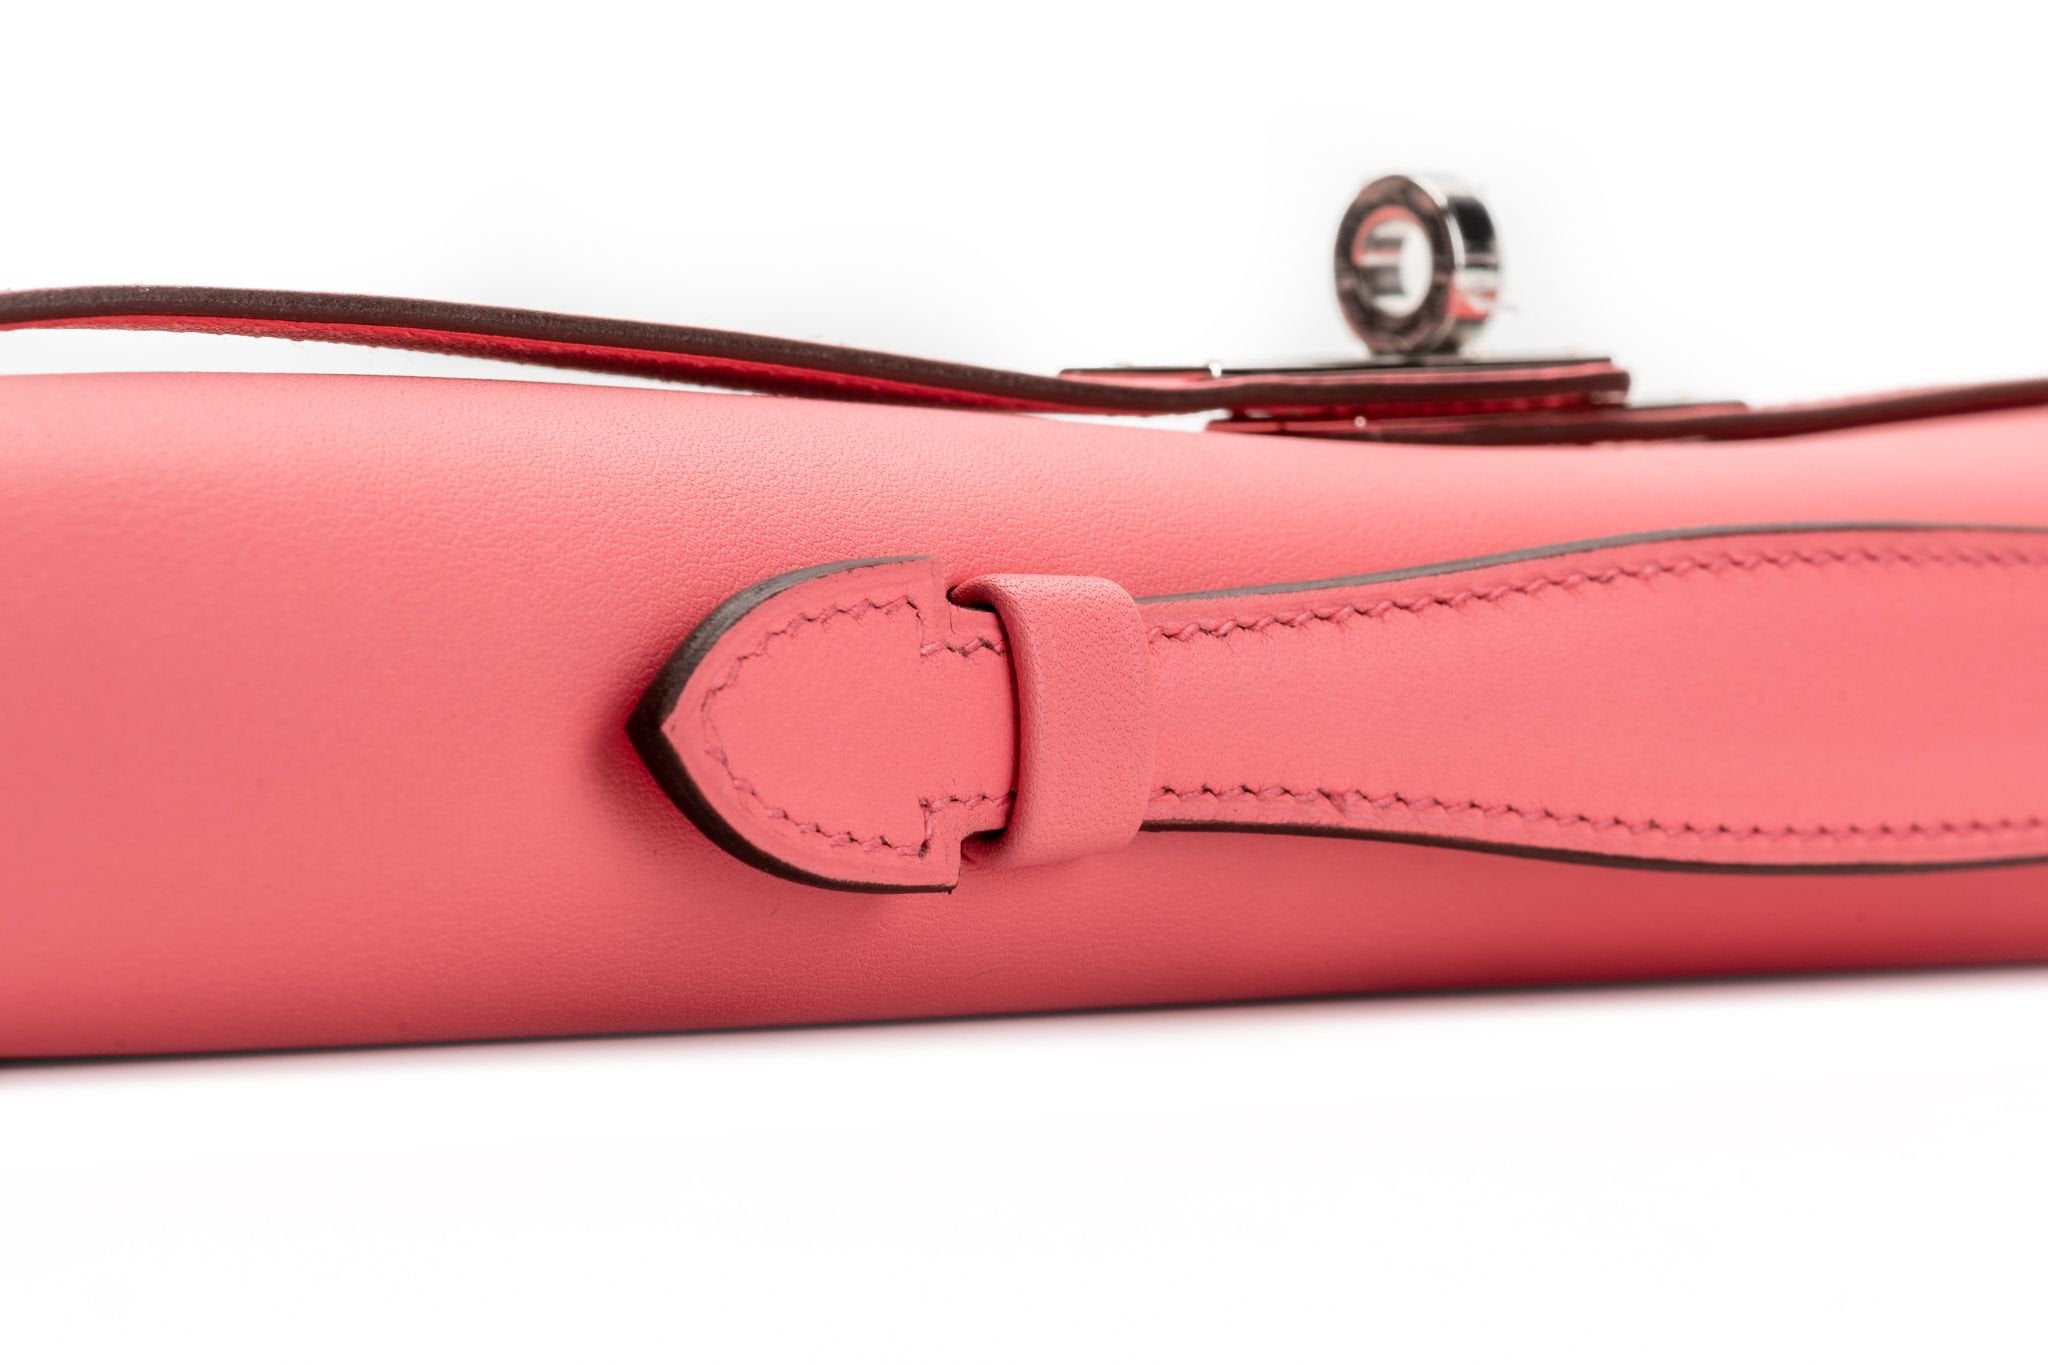 SOLD OUT** NEW HERMES Kelly Cut Clutch. Rose Azalee / PHW. 100